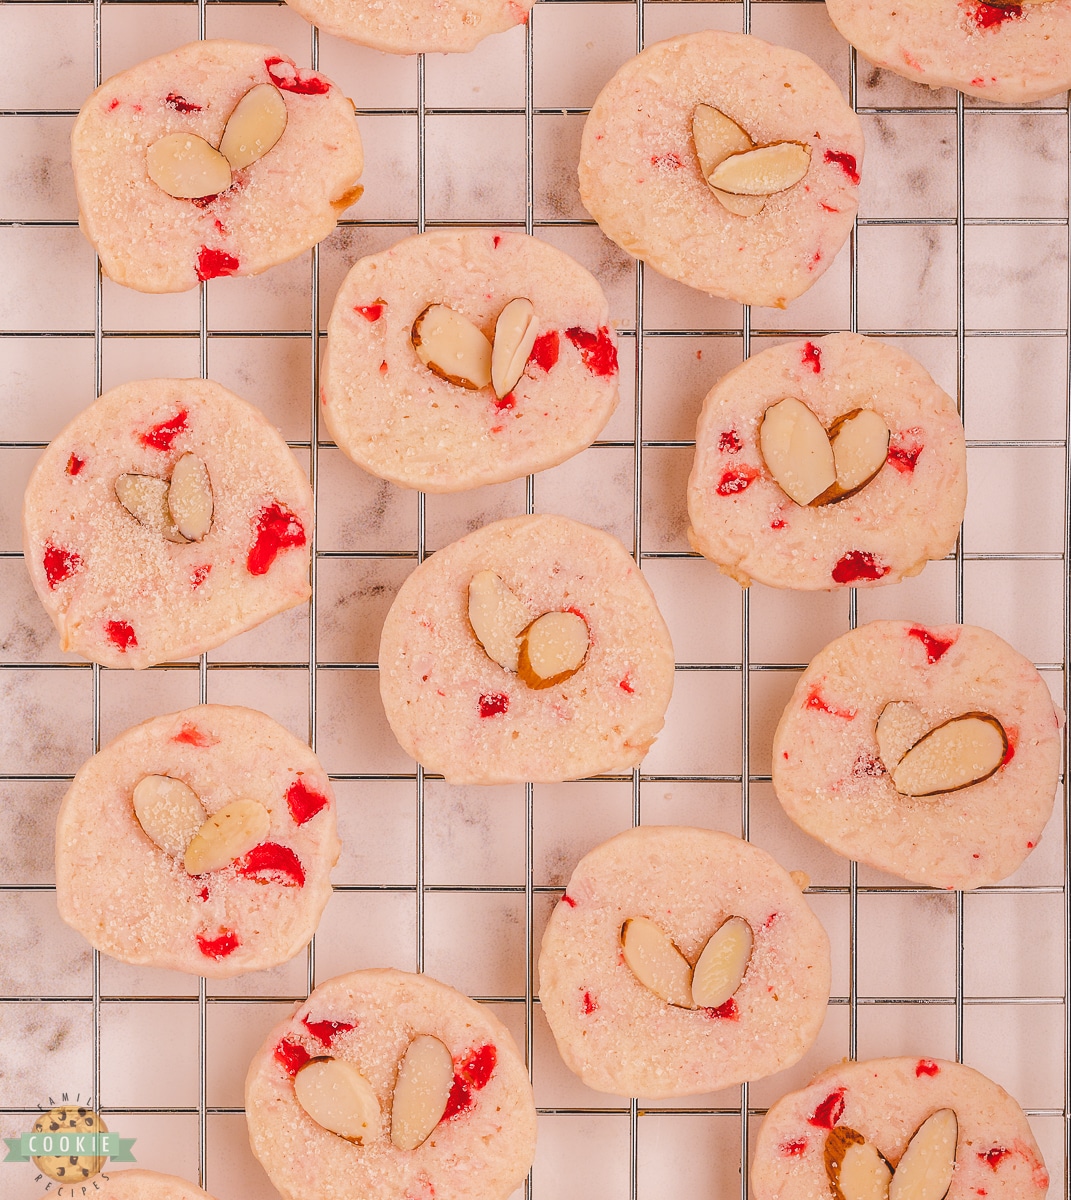 coconut almond cherry shortbread on a cooling rack